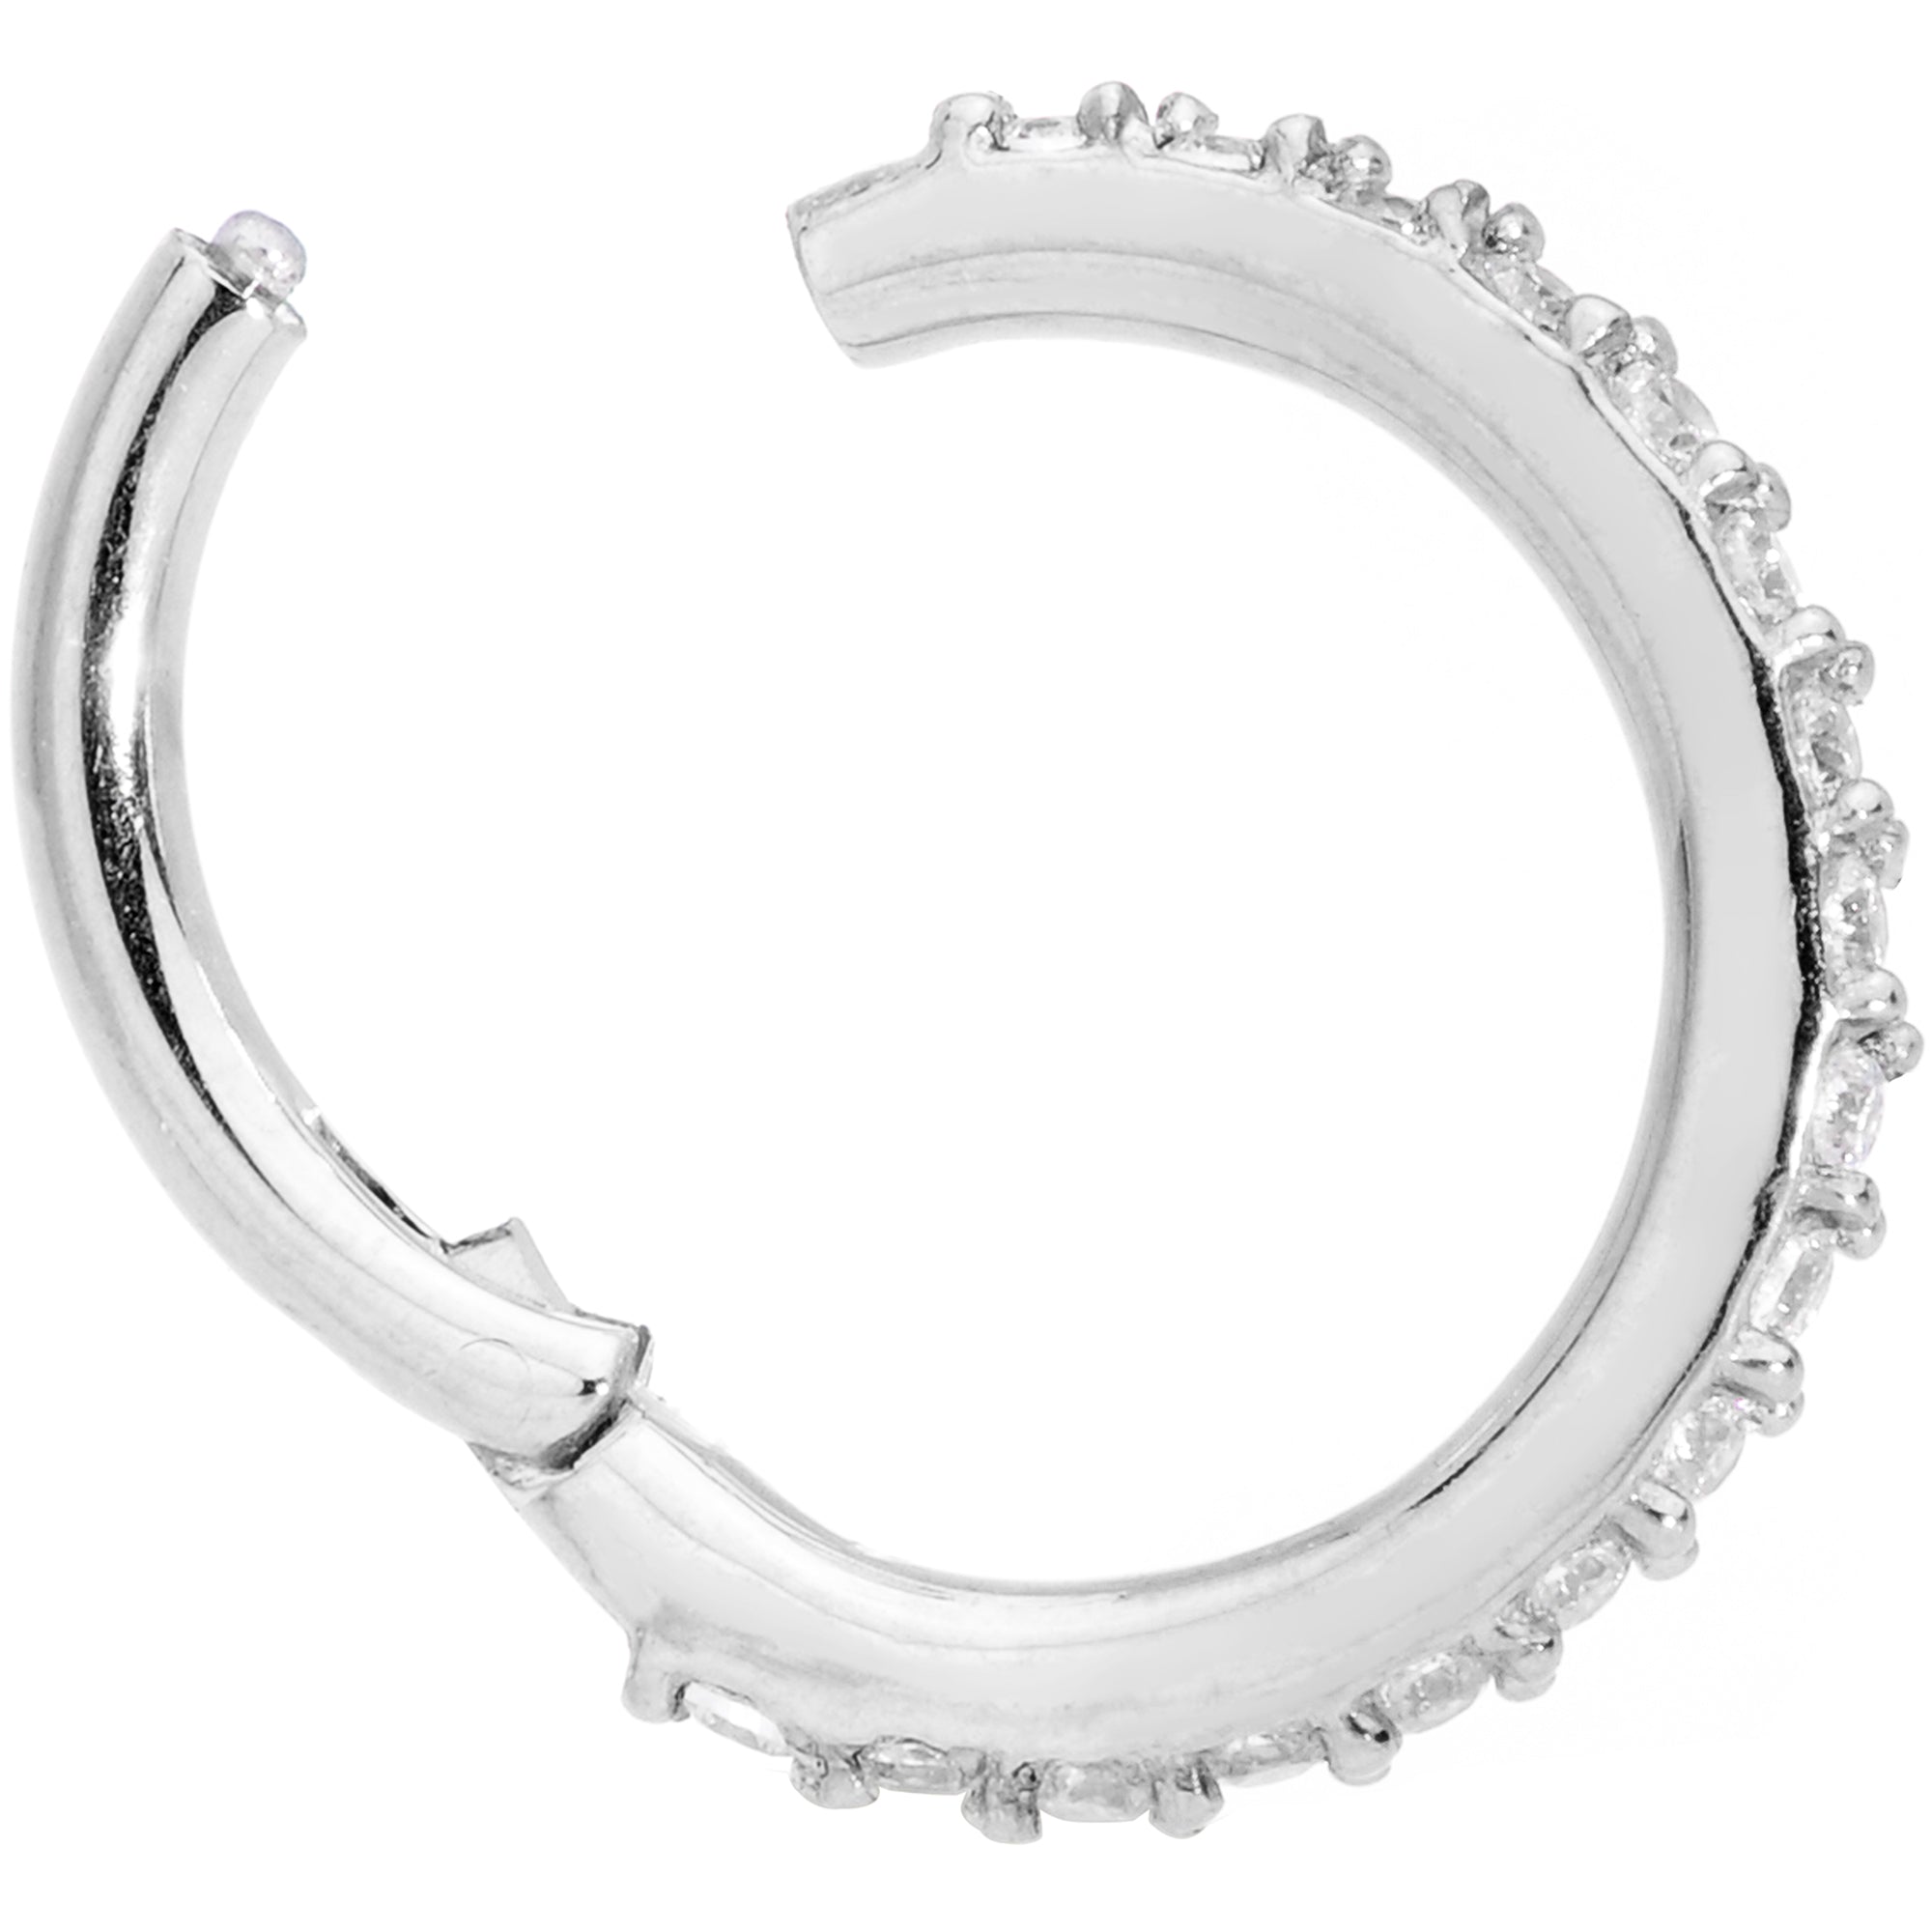 16 Gauge 5/16 Clear CZ Gem Stainless Steel Hinged Segment Ring